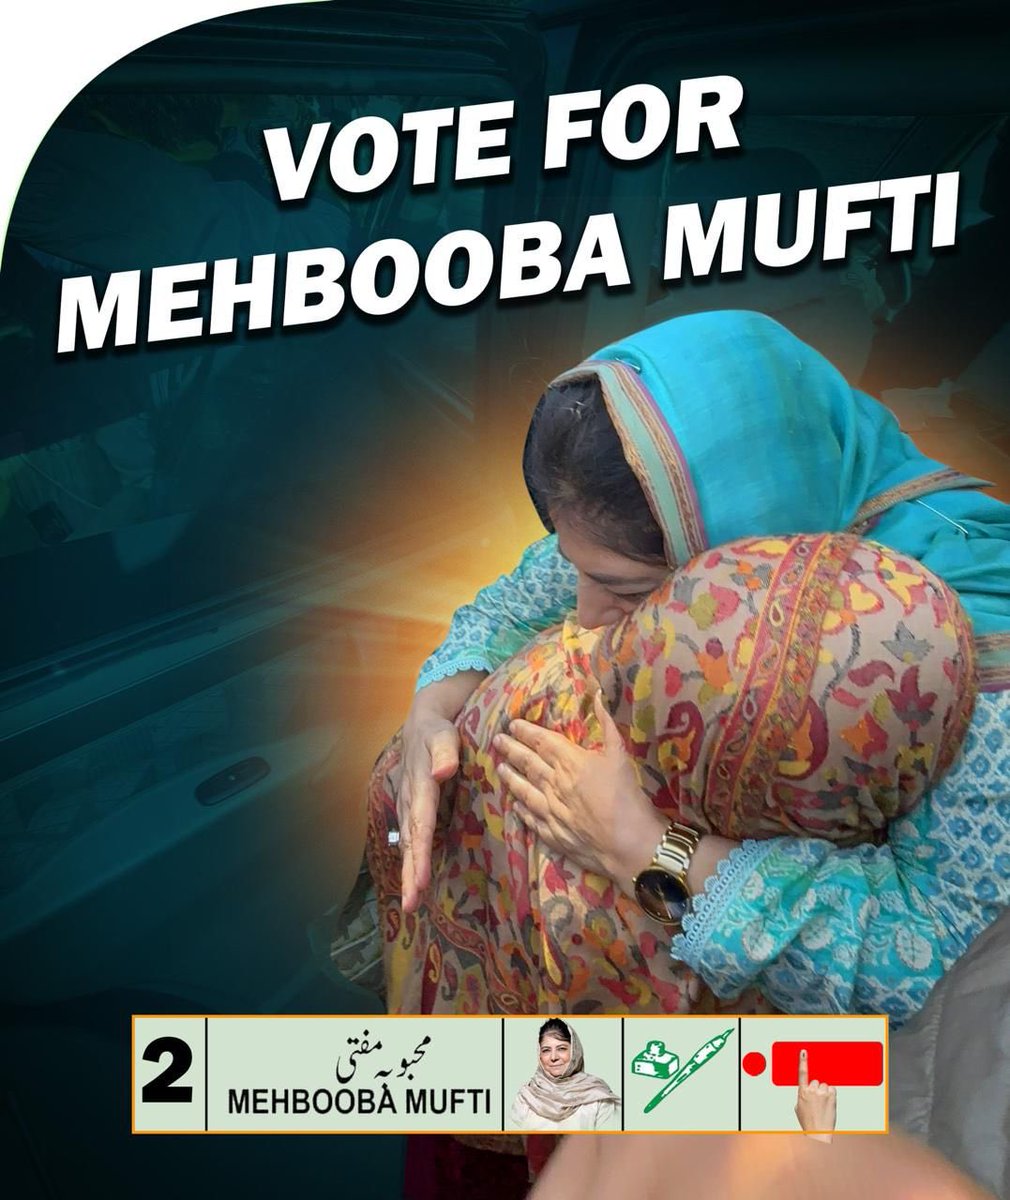 VOTE FOR Mehbooba MUFTI JI VOTE FOR PDP